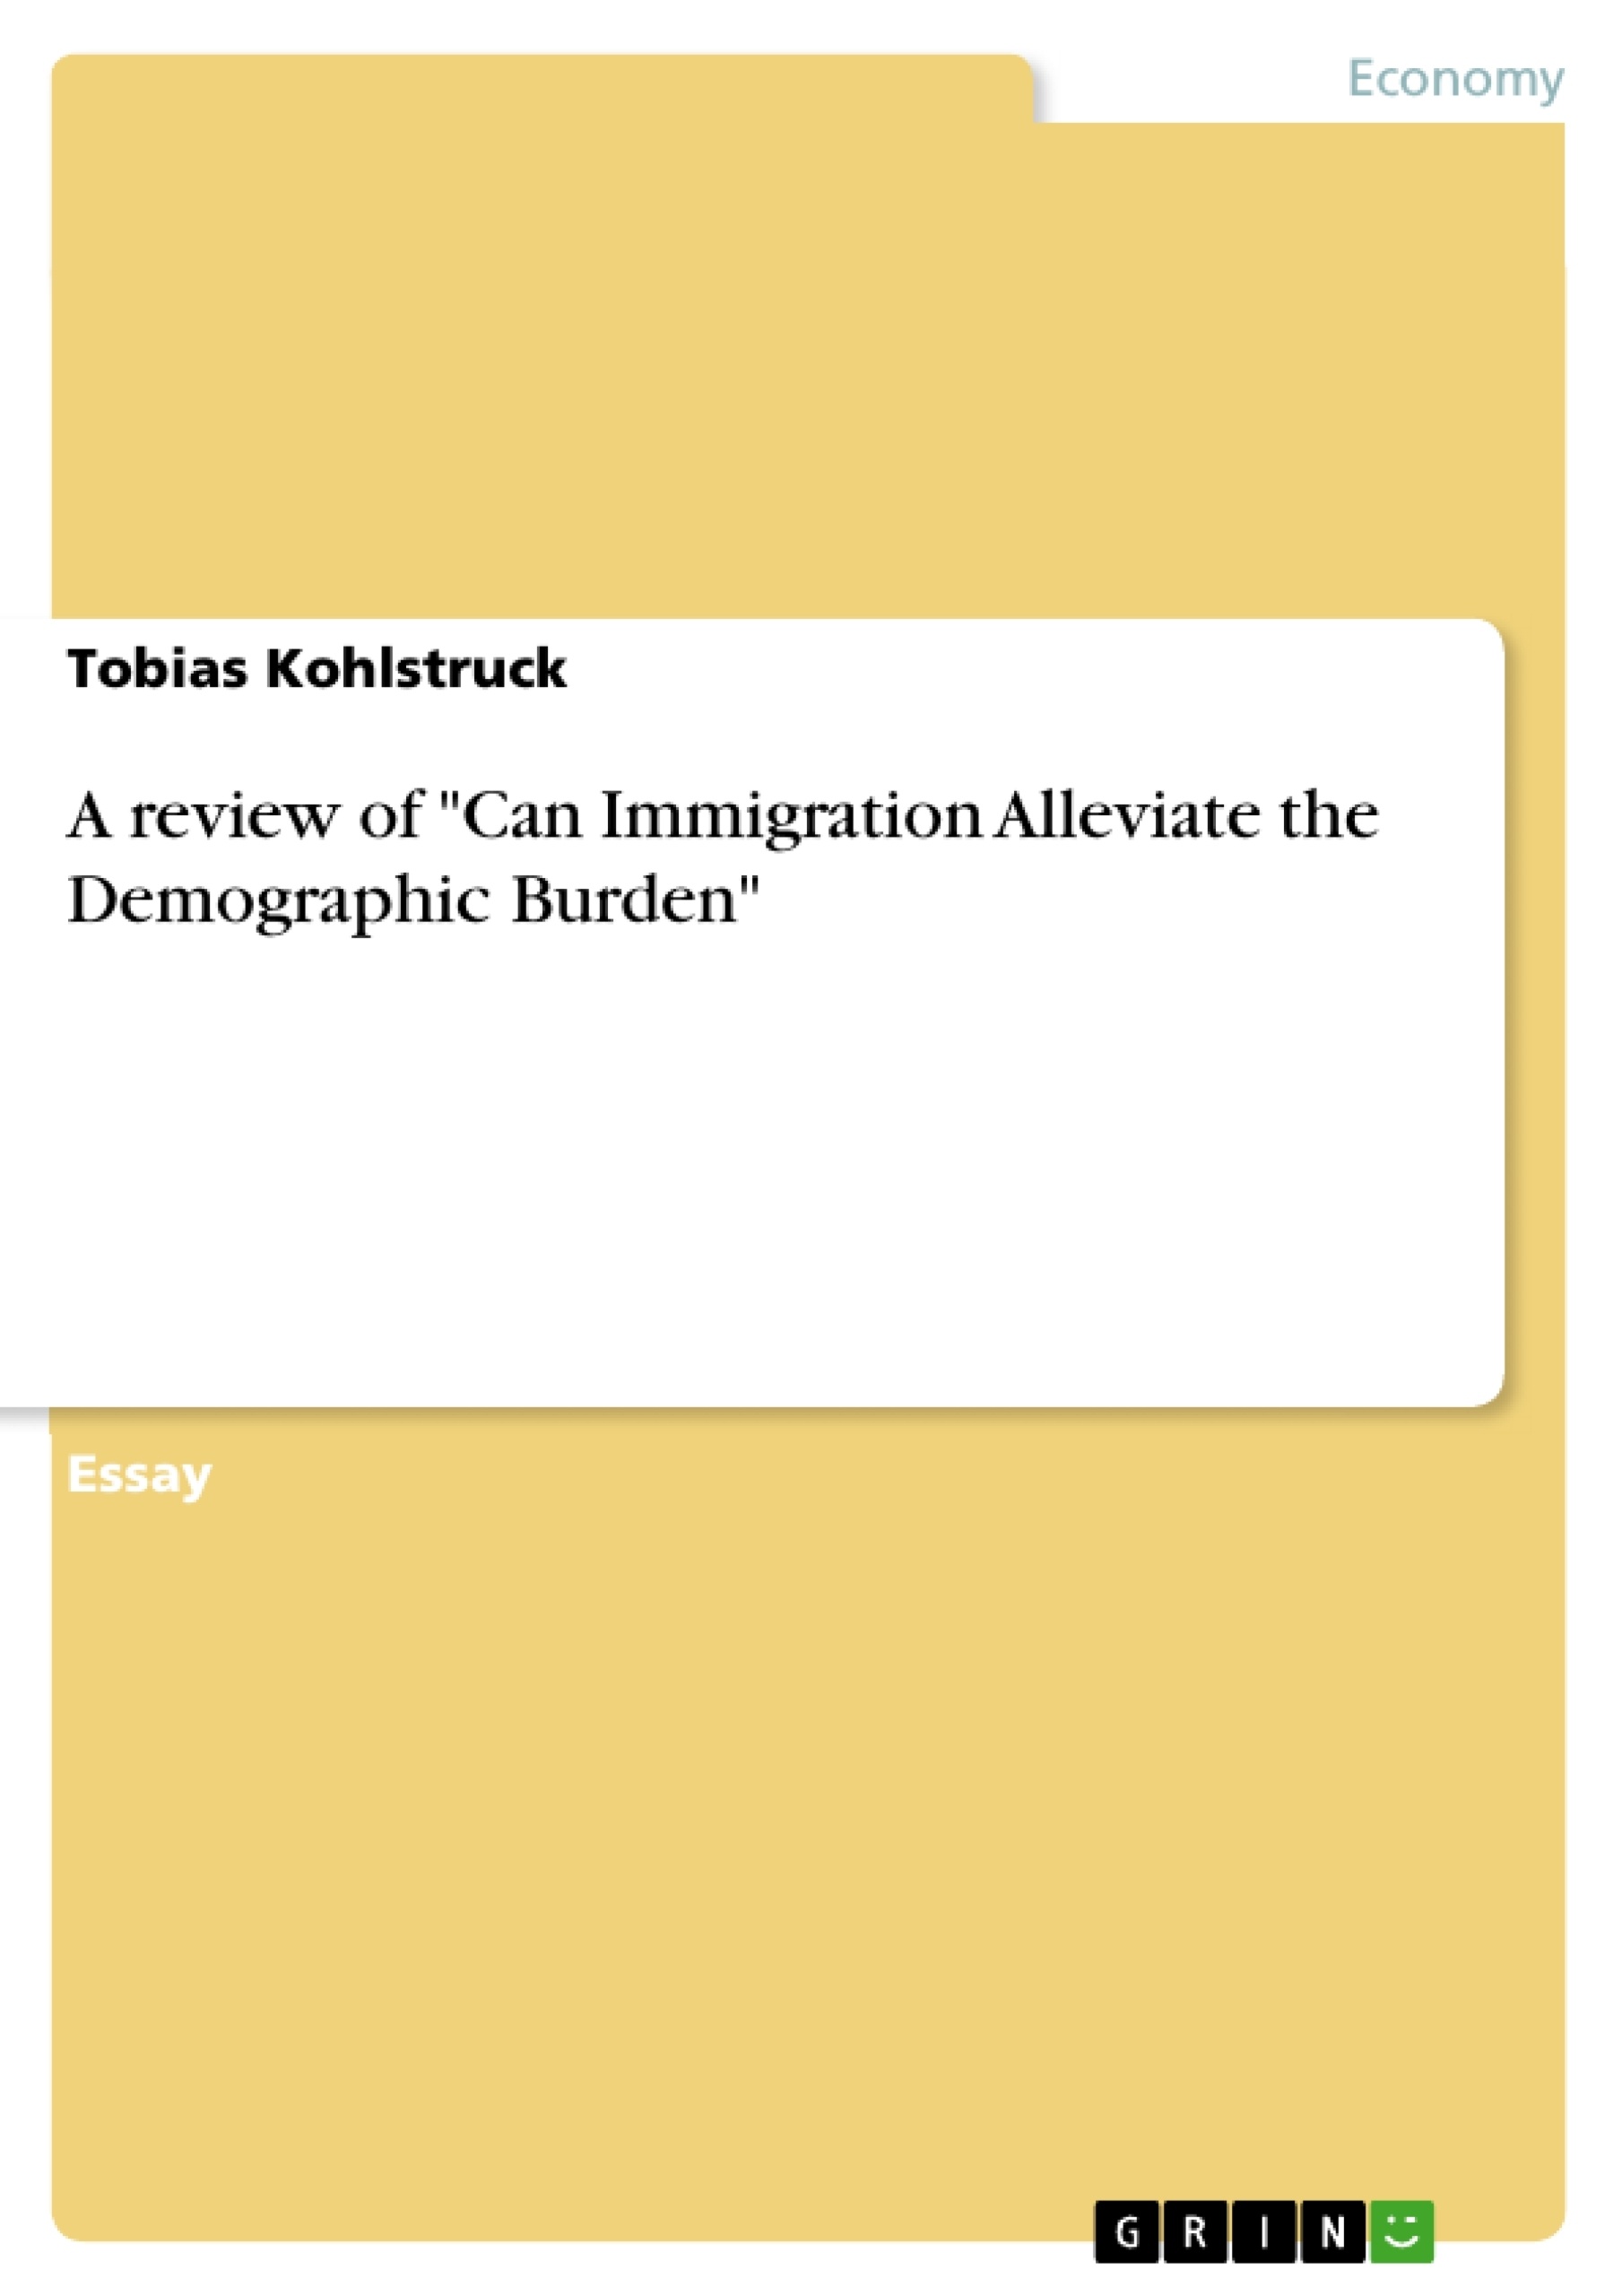 Title: A review of "Can Immigration Alleviate the Demographic Burden"